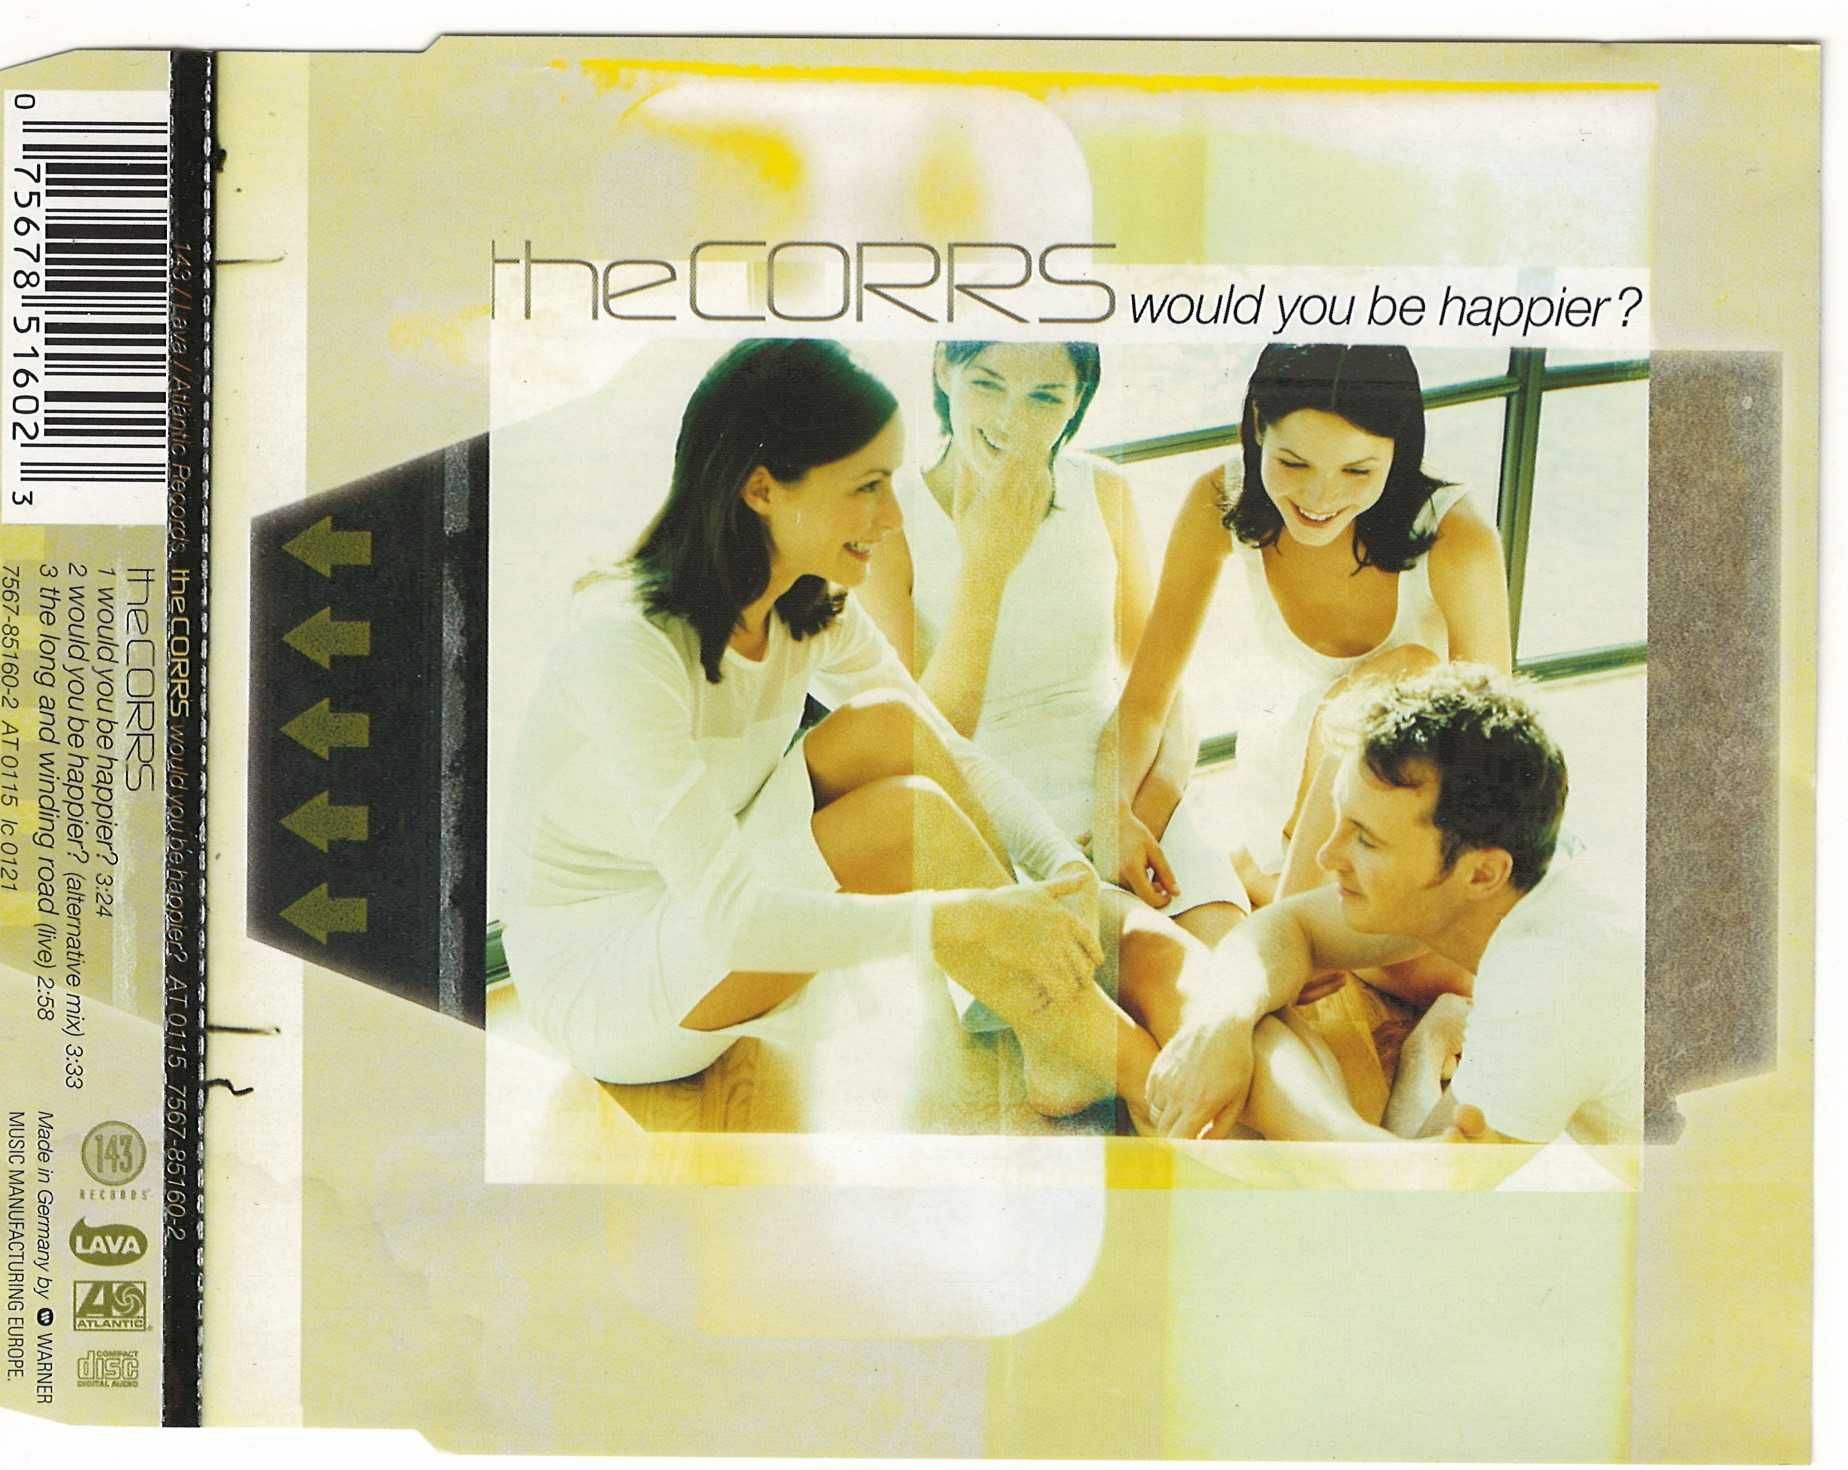 THE CORRS – Would You Be Happier? (singiel)